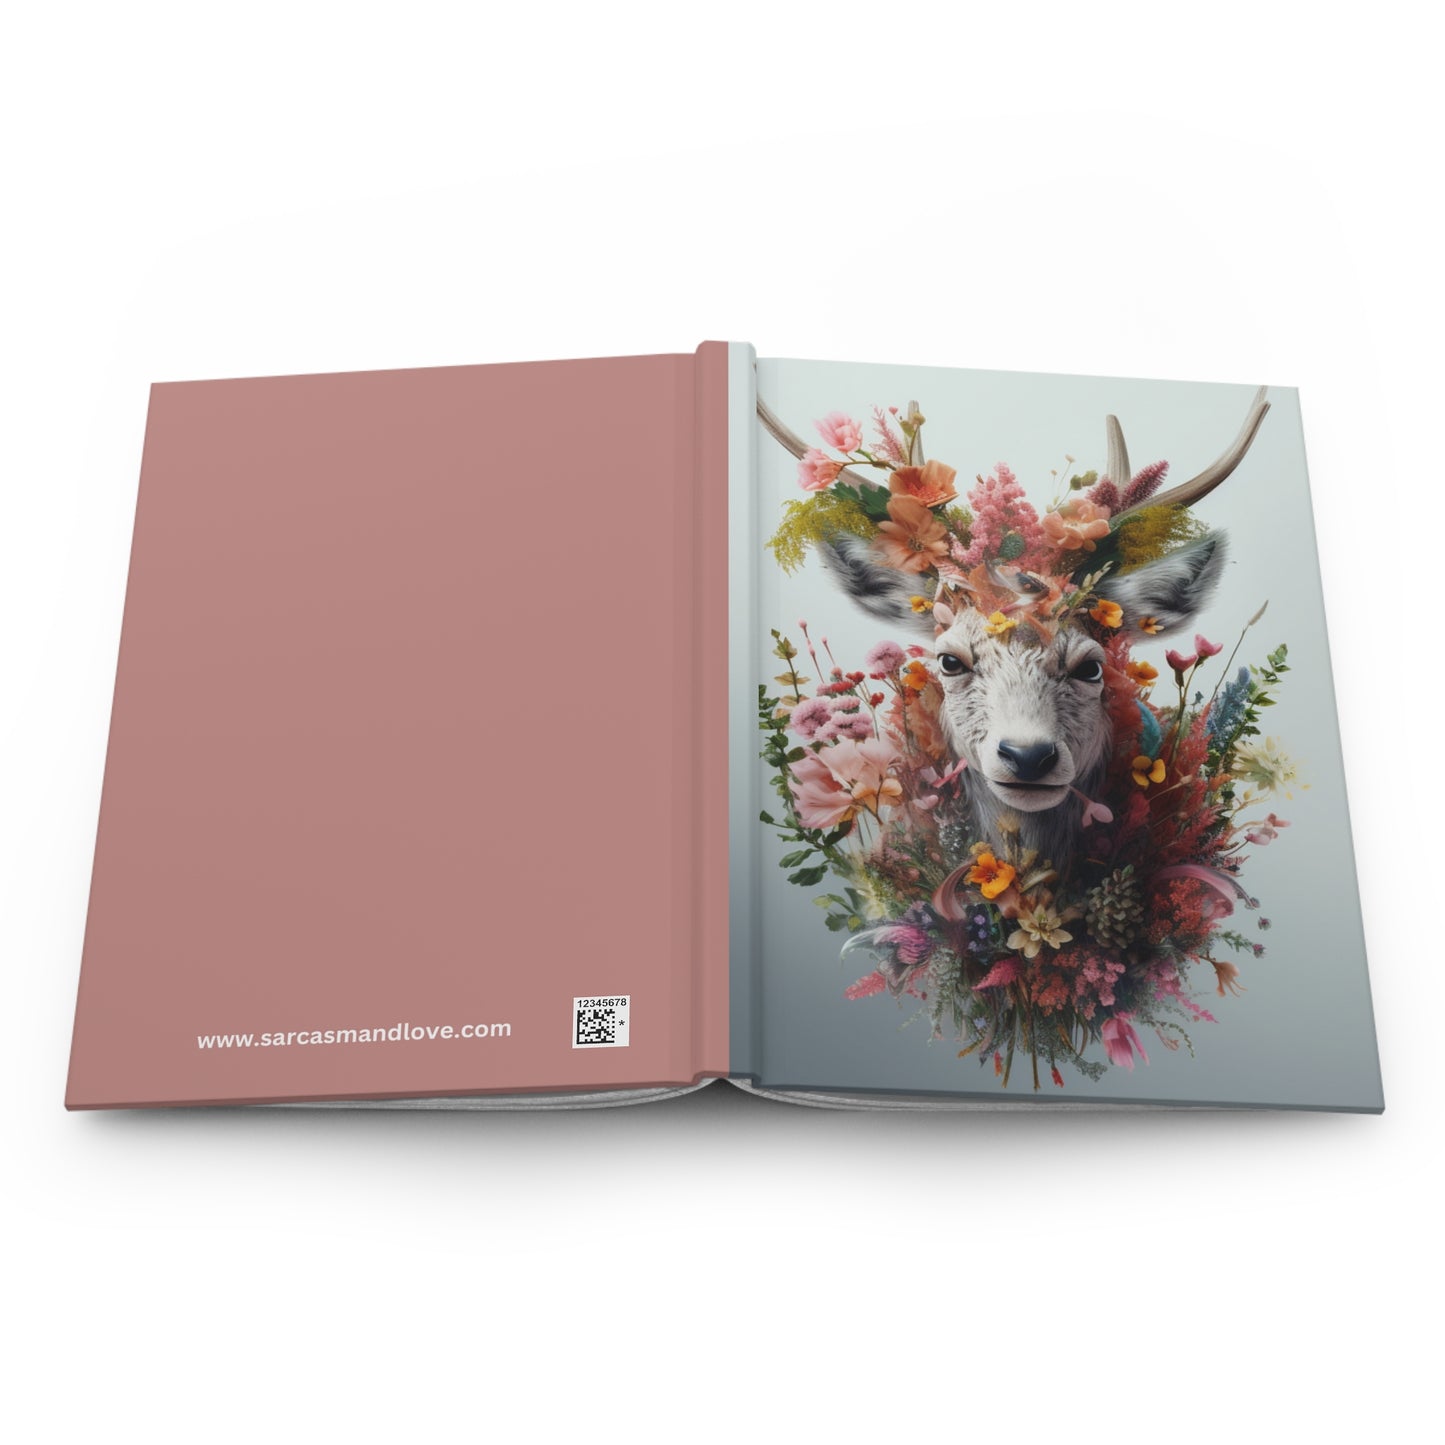 Deer Head Wildflower Hardcover Notebook - Gradient Design - Lined Journal - Self Care & Wellness Writing - Perfect Gift - Size 5.75"x7.5"